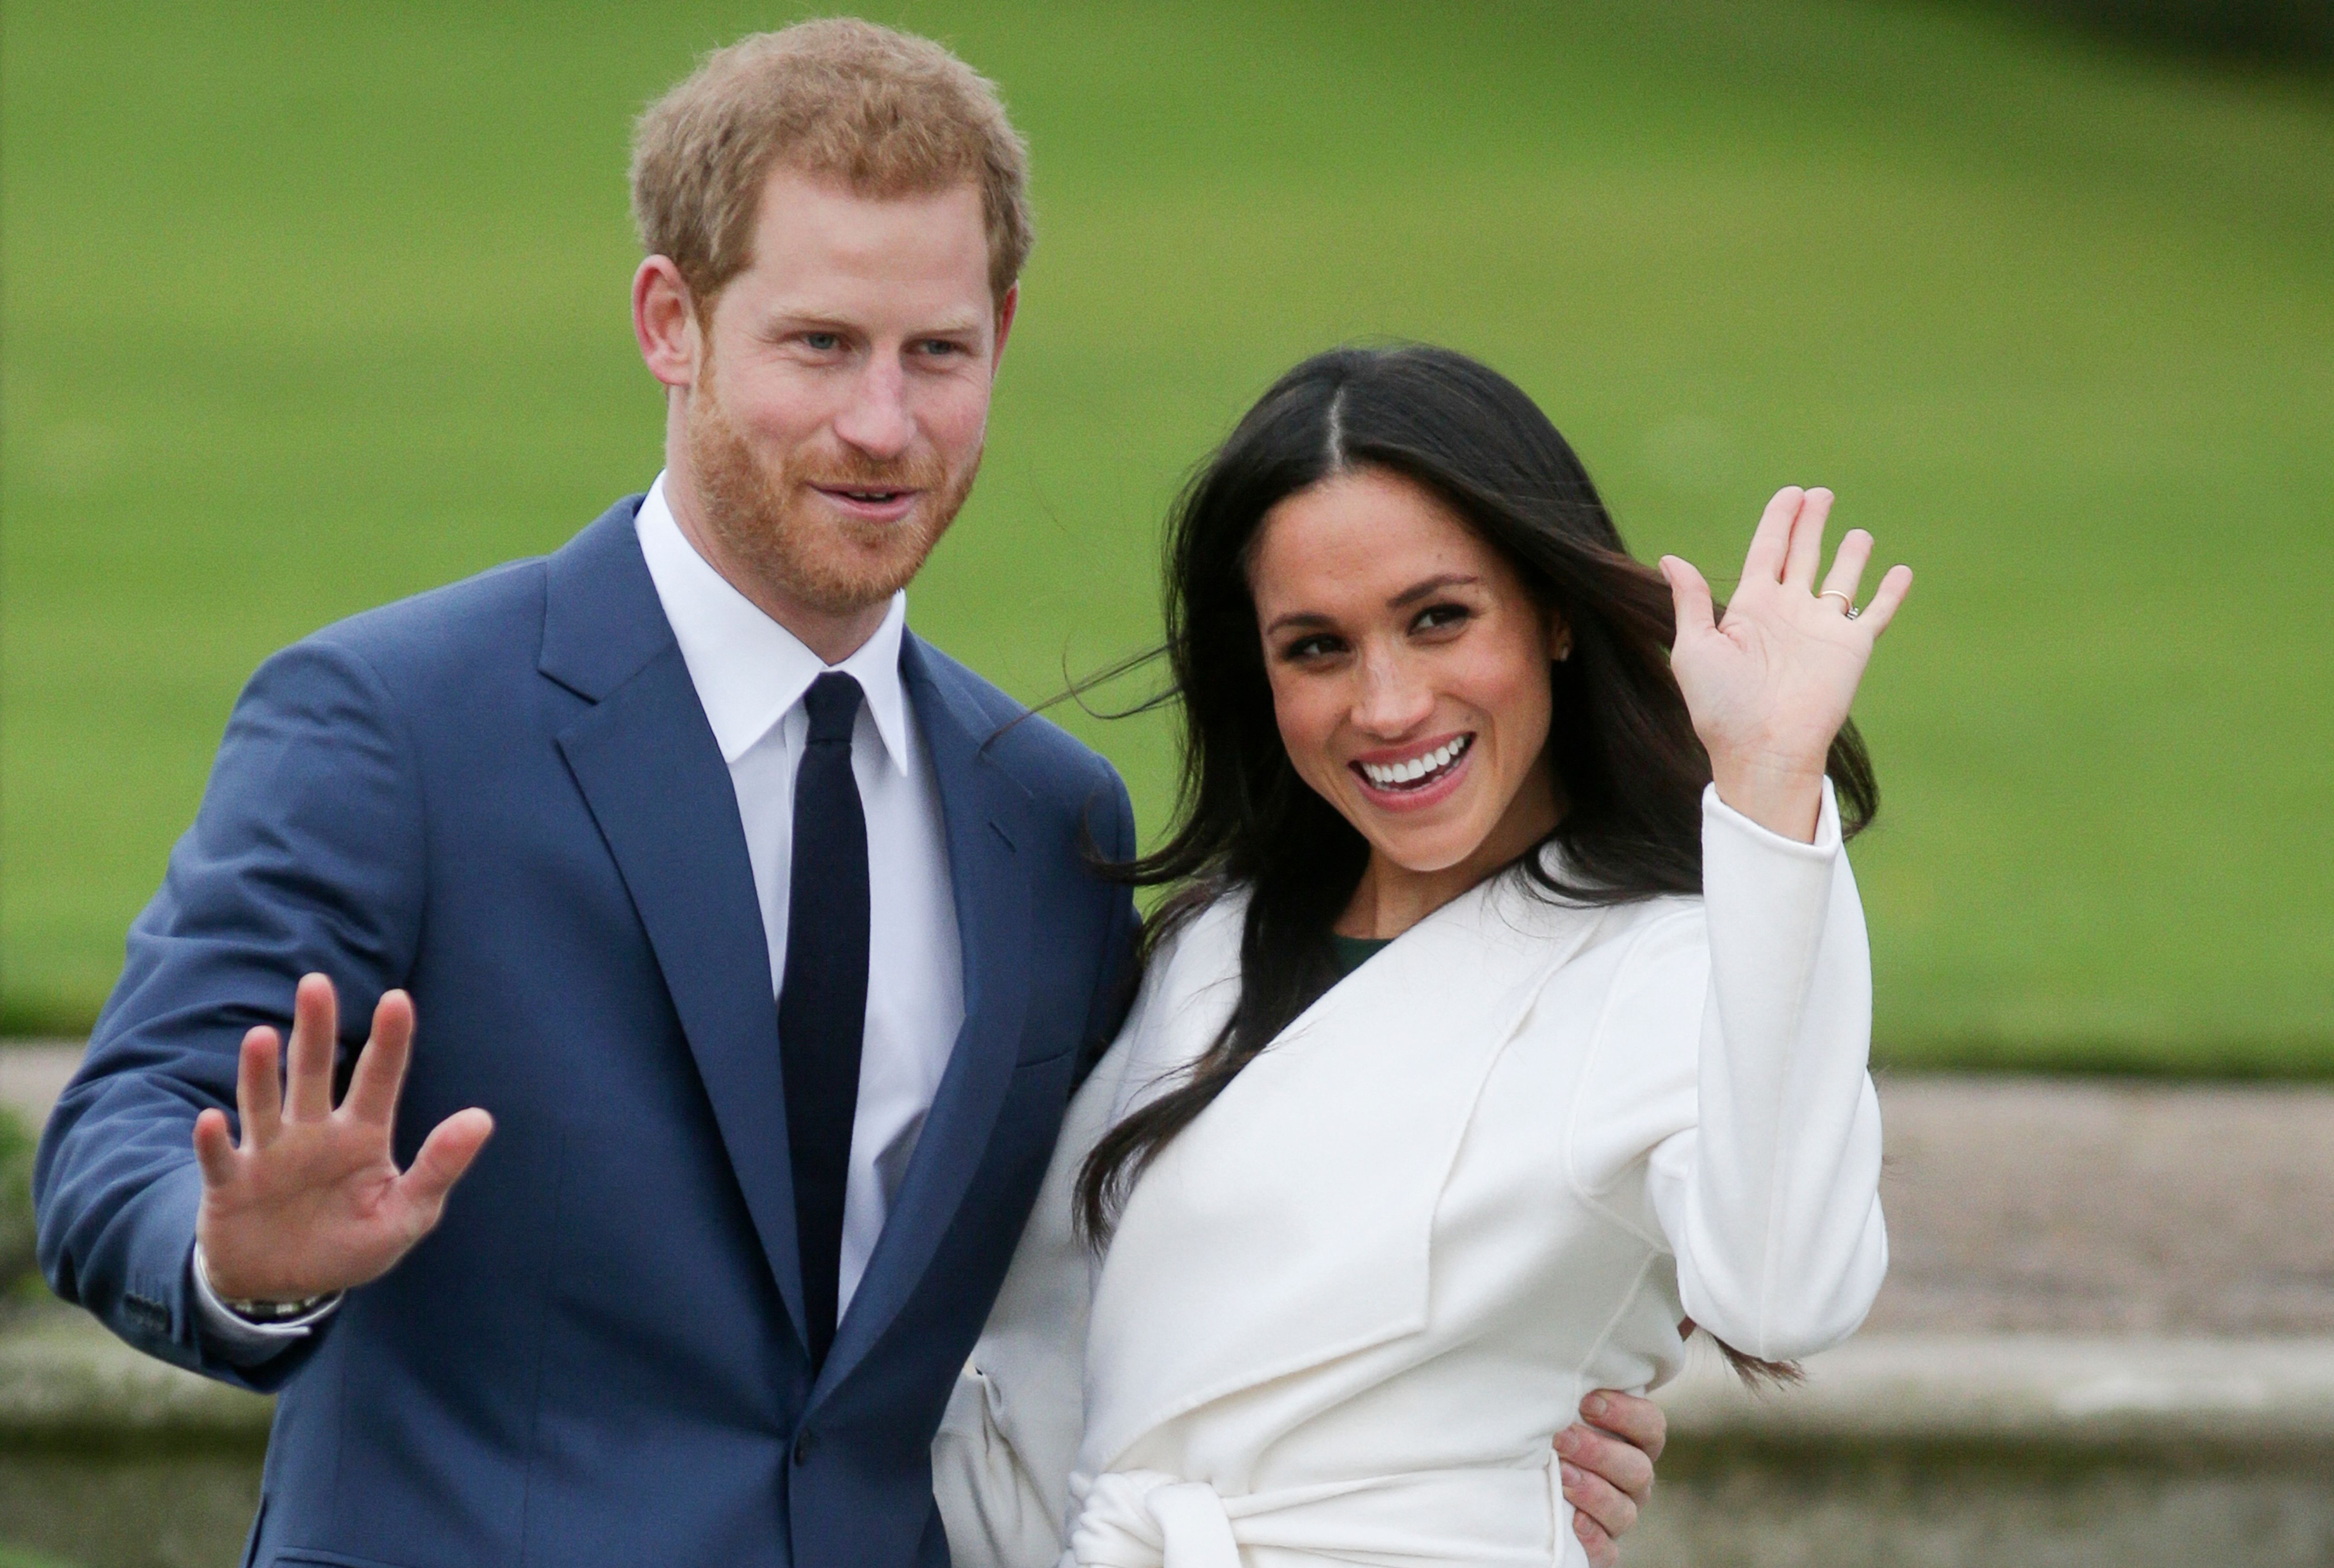 Prince Harry and Meghan Markle pose for a photo at Kensington Palace following their engagement announcement